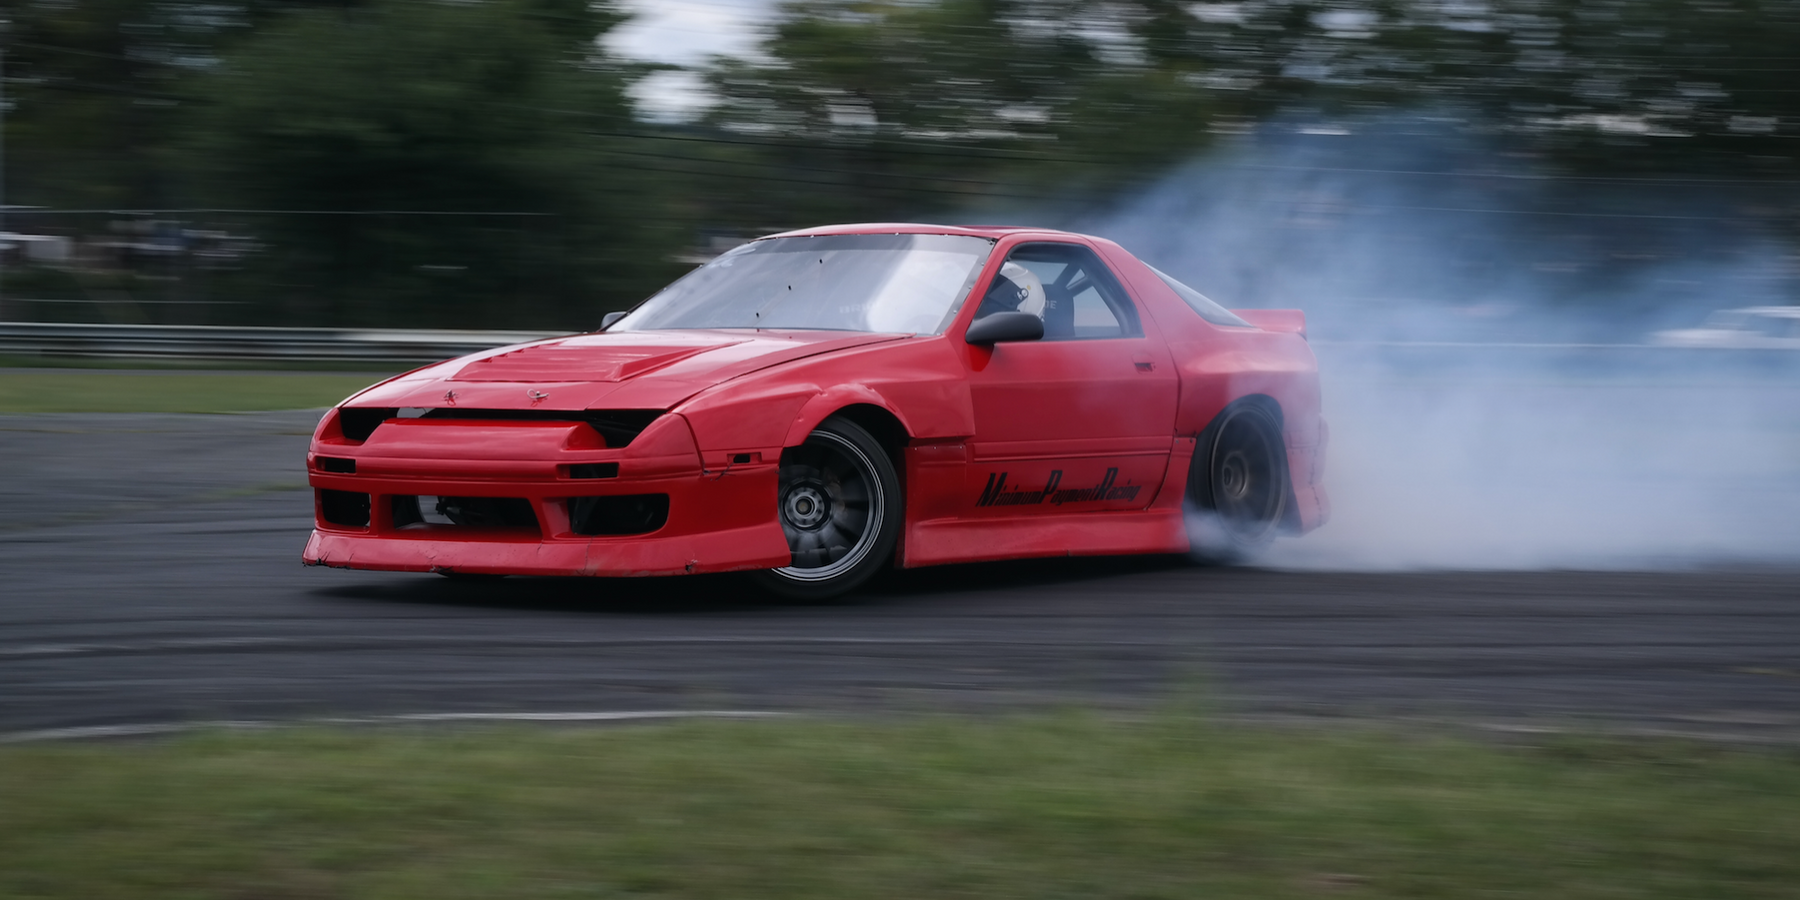 The Story of Drifting: From Illegal Mountain Roads to a Worldwide Phenomenon